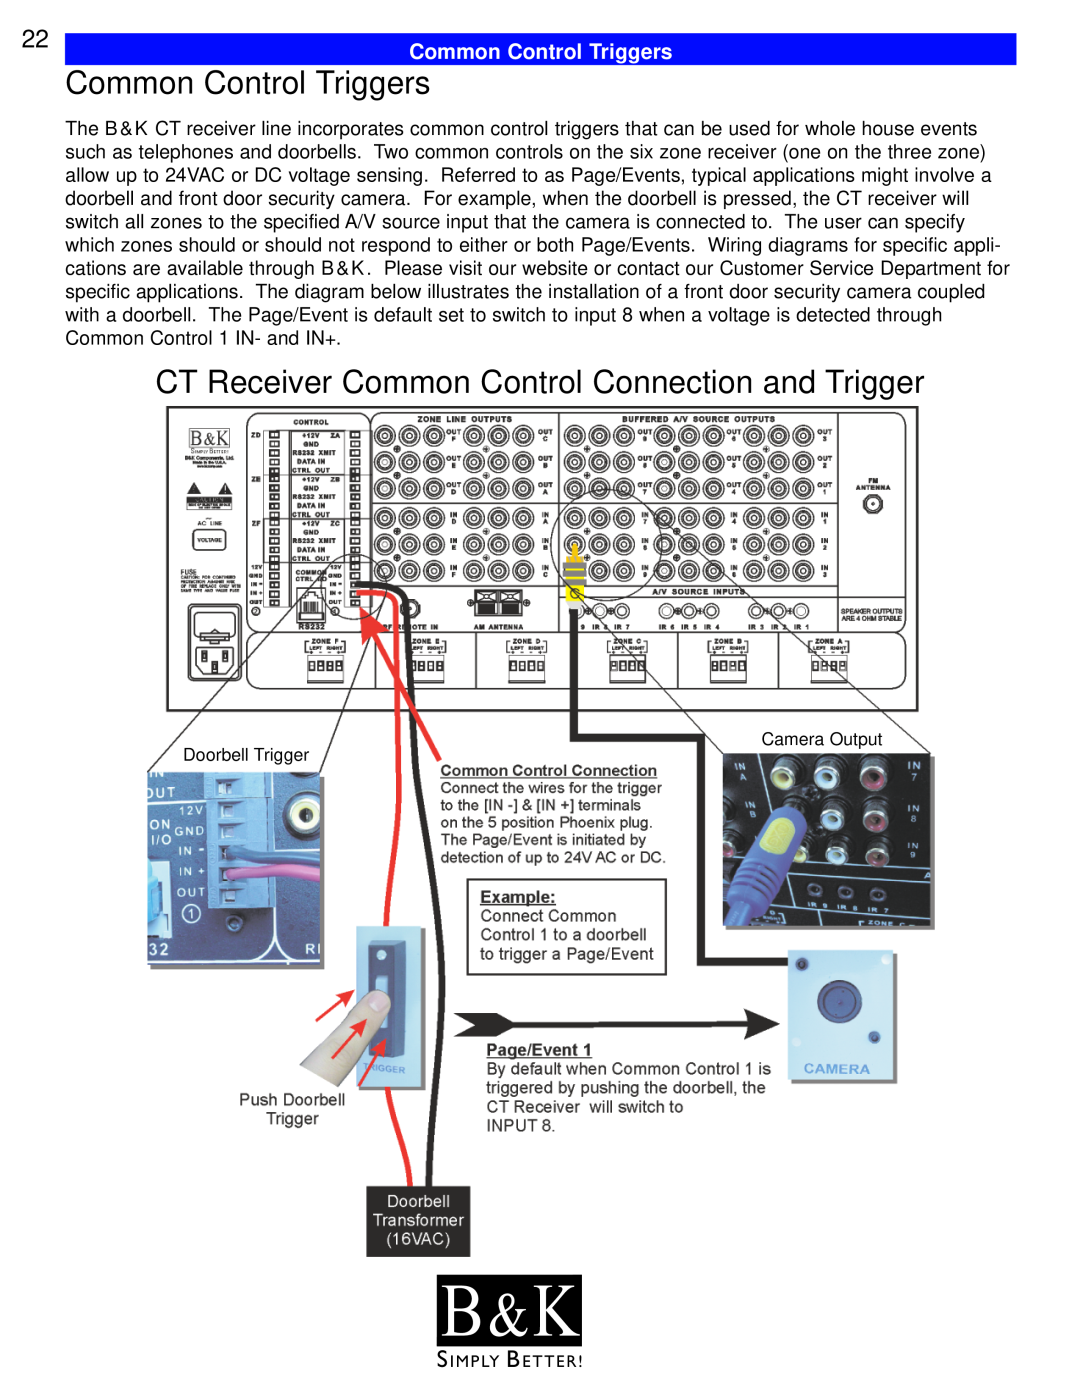 B&K CT602, CT600, CT310, CT610, CT300 Common Control Triggers, CT Receiver Common Control Connection and Trigger, B & K 